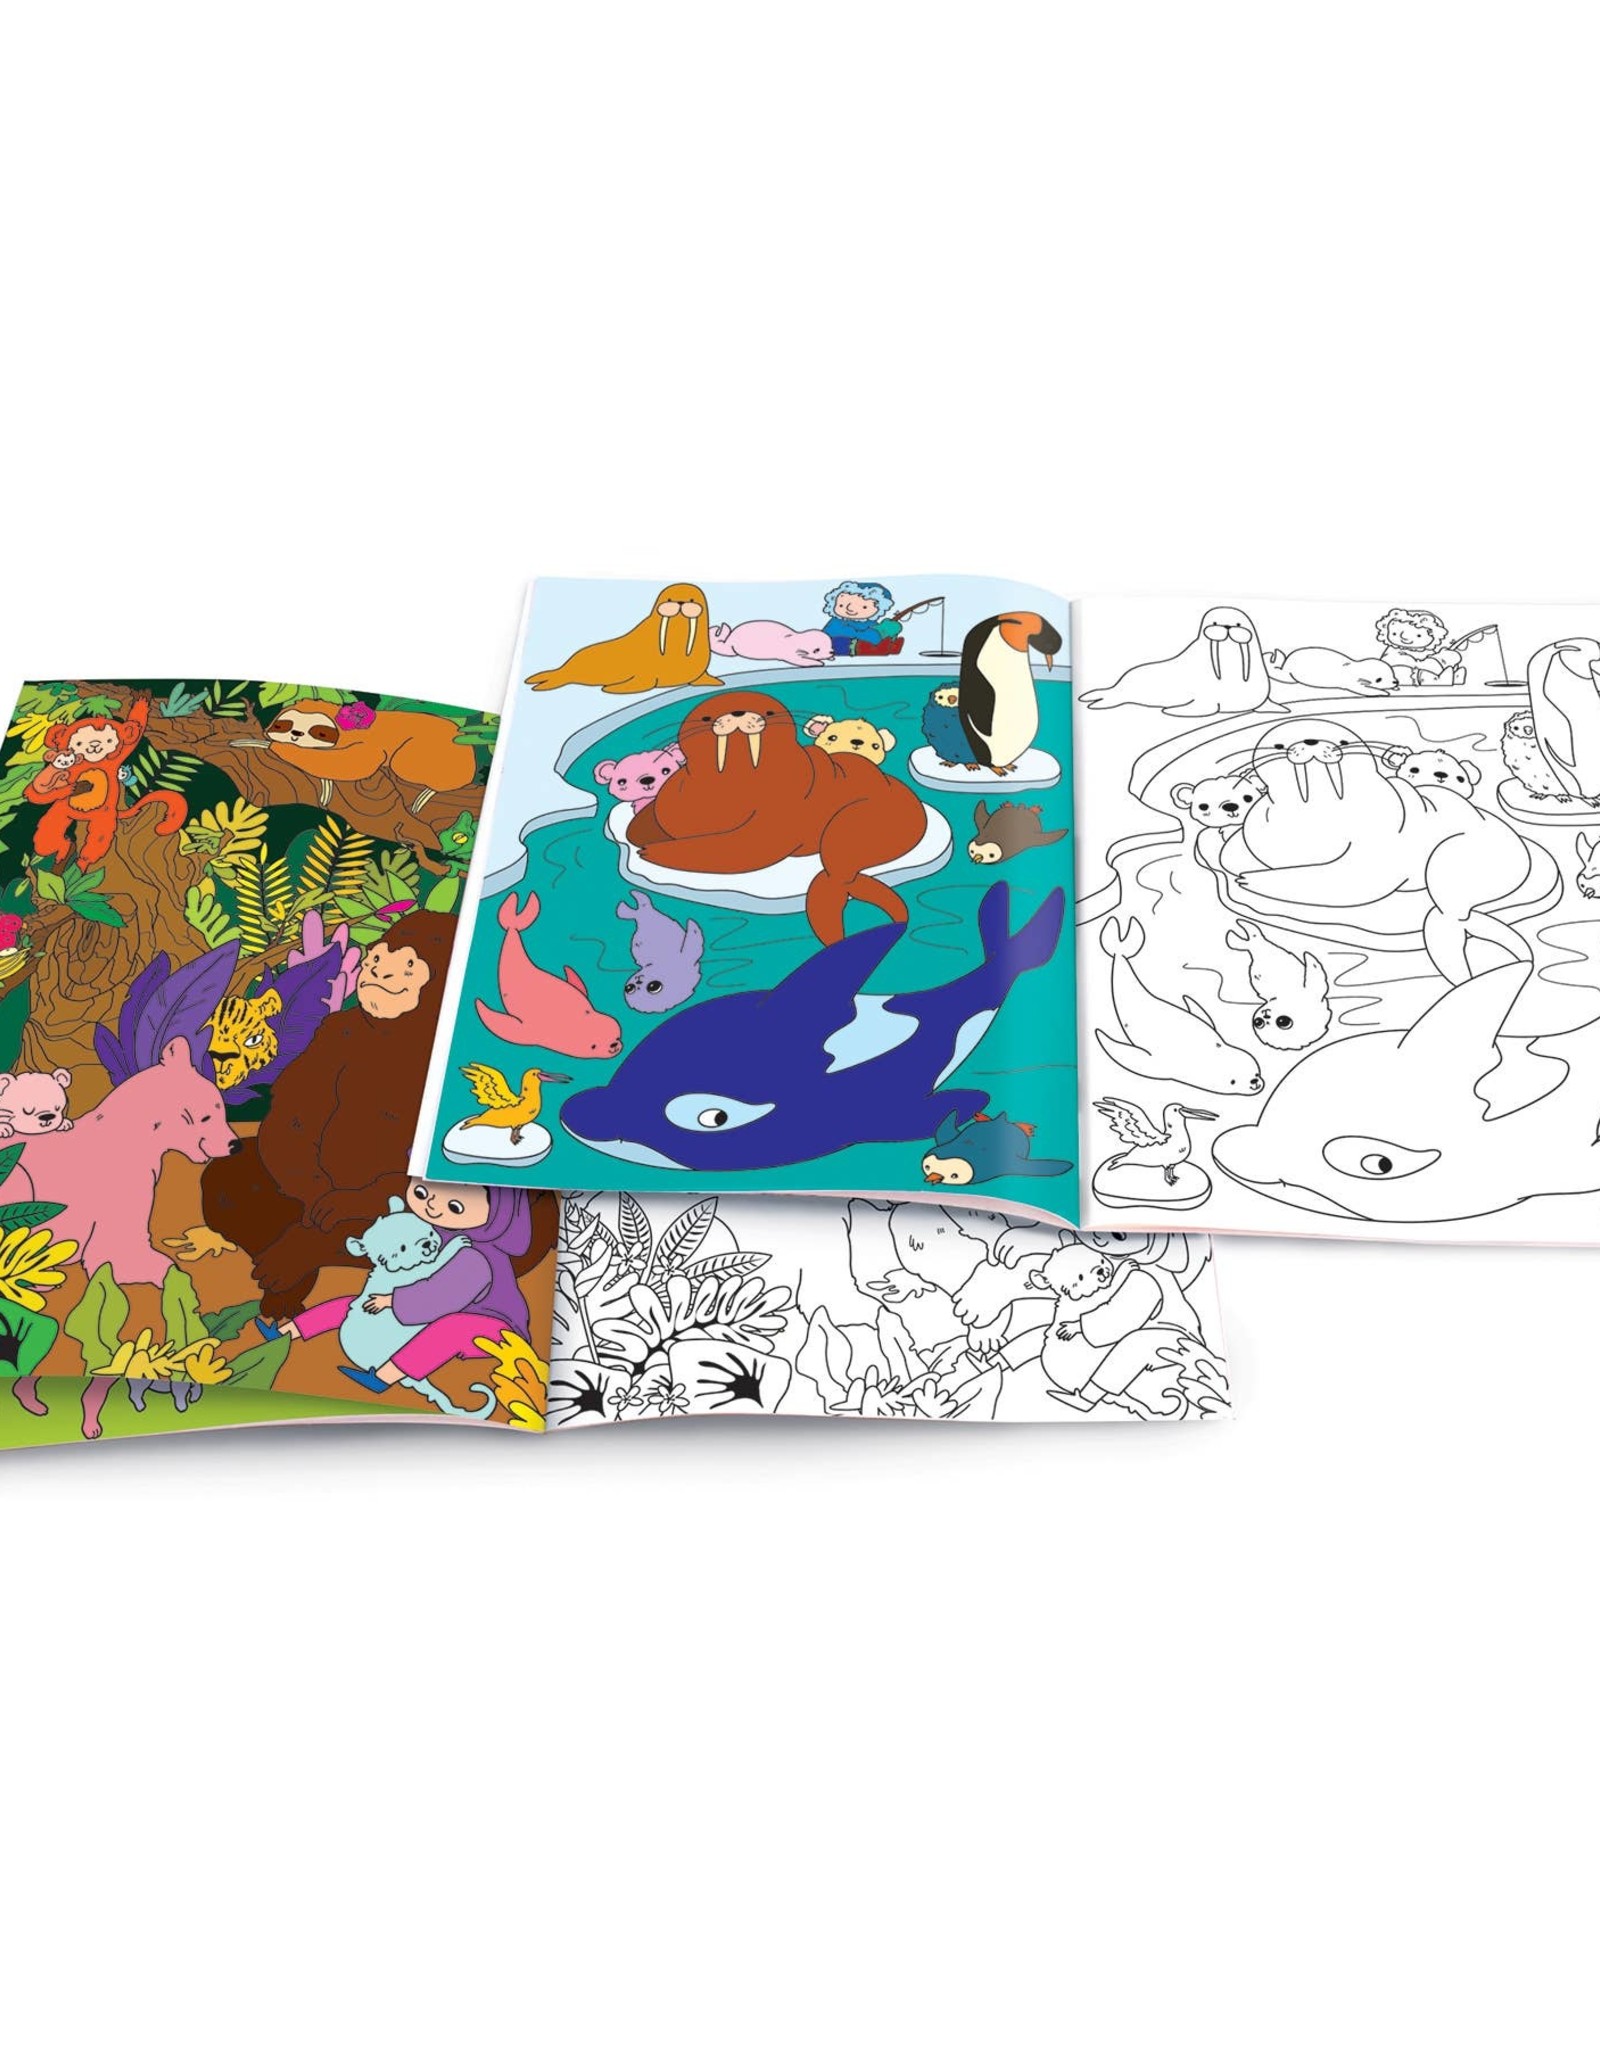 The Piggy Story Animals Around the World Dry Erase Coloring Book